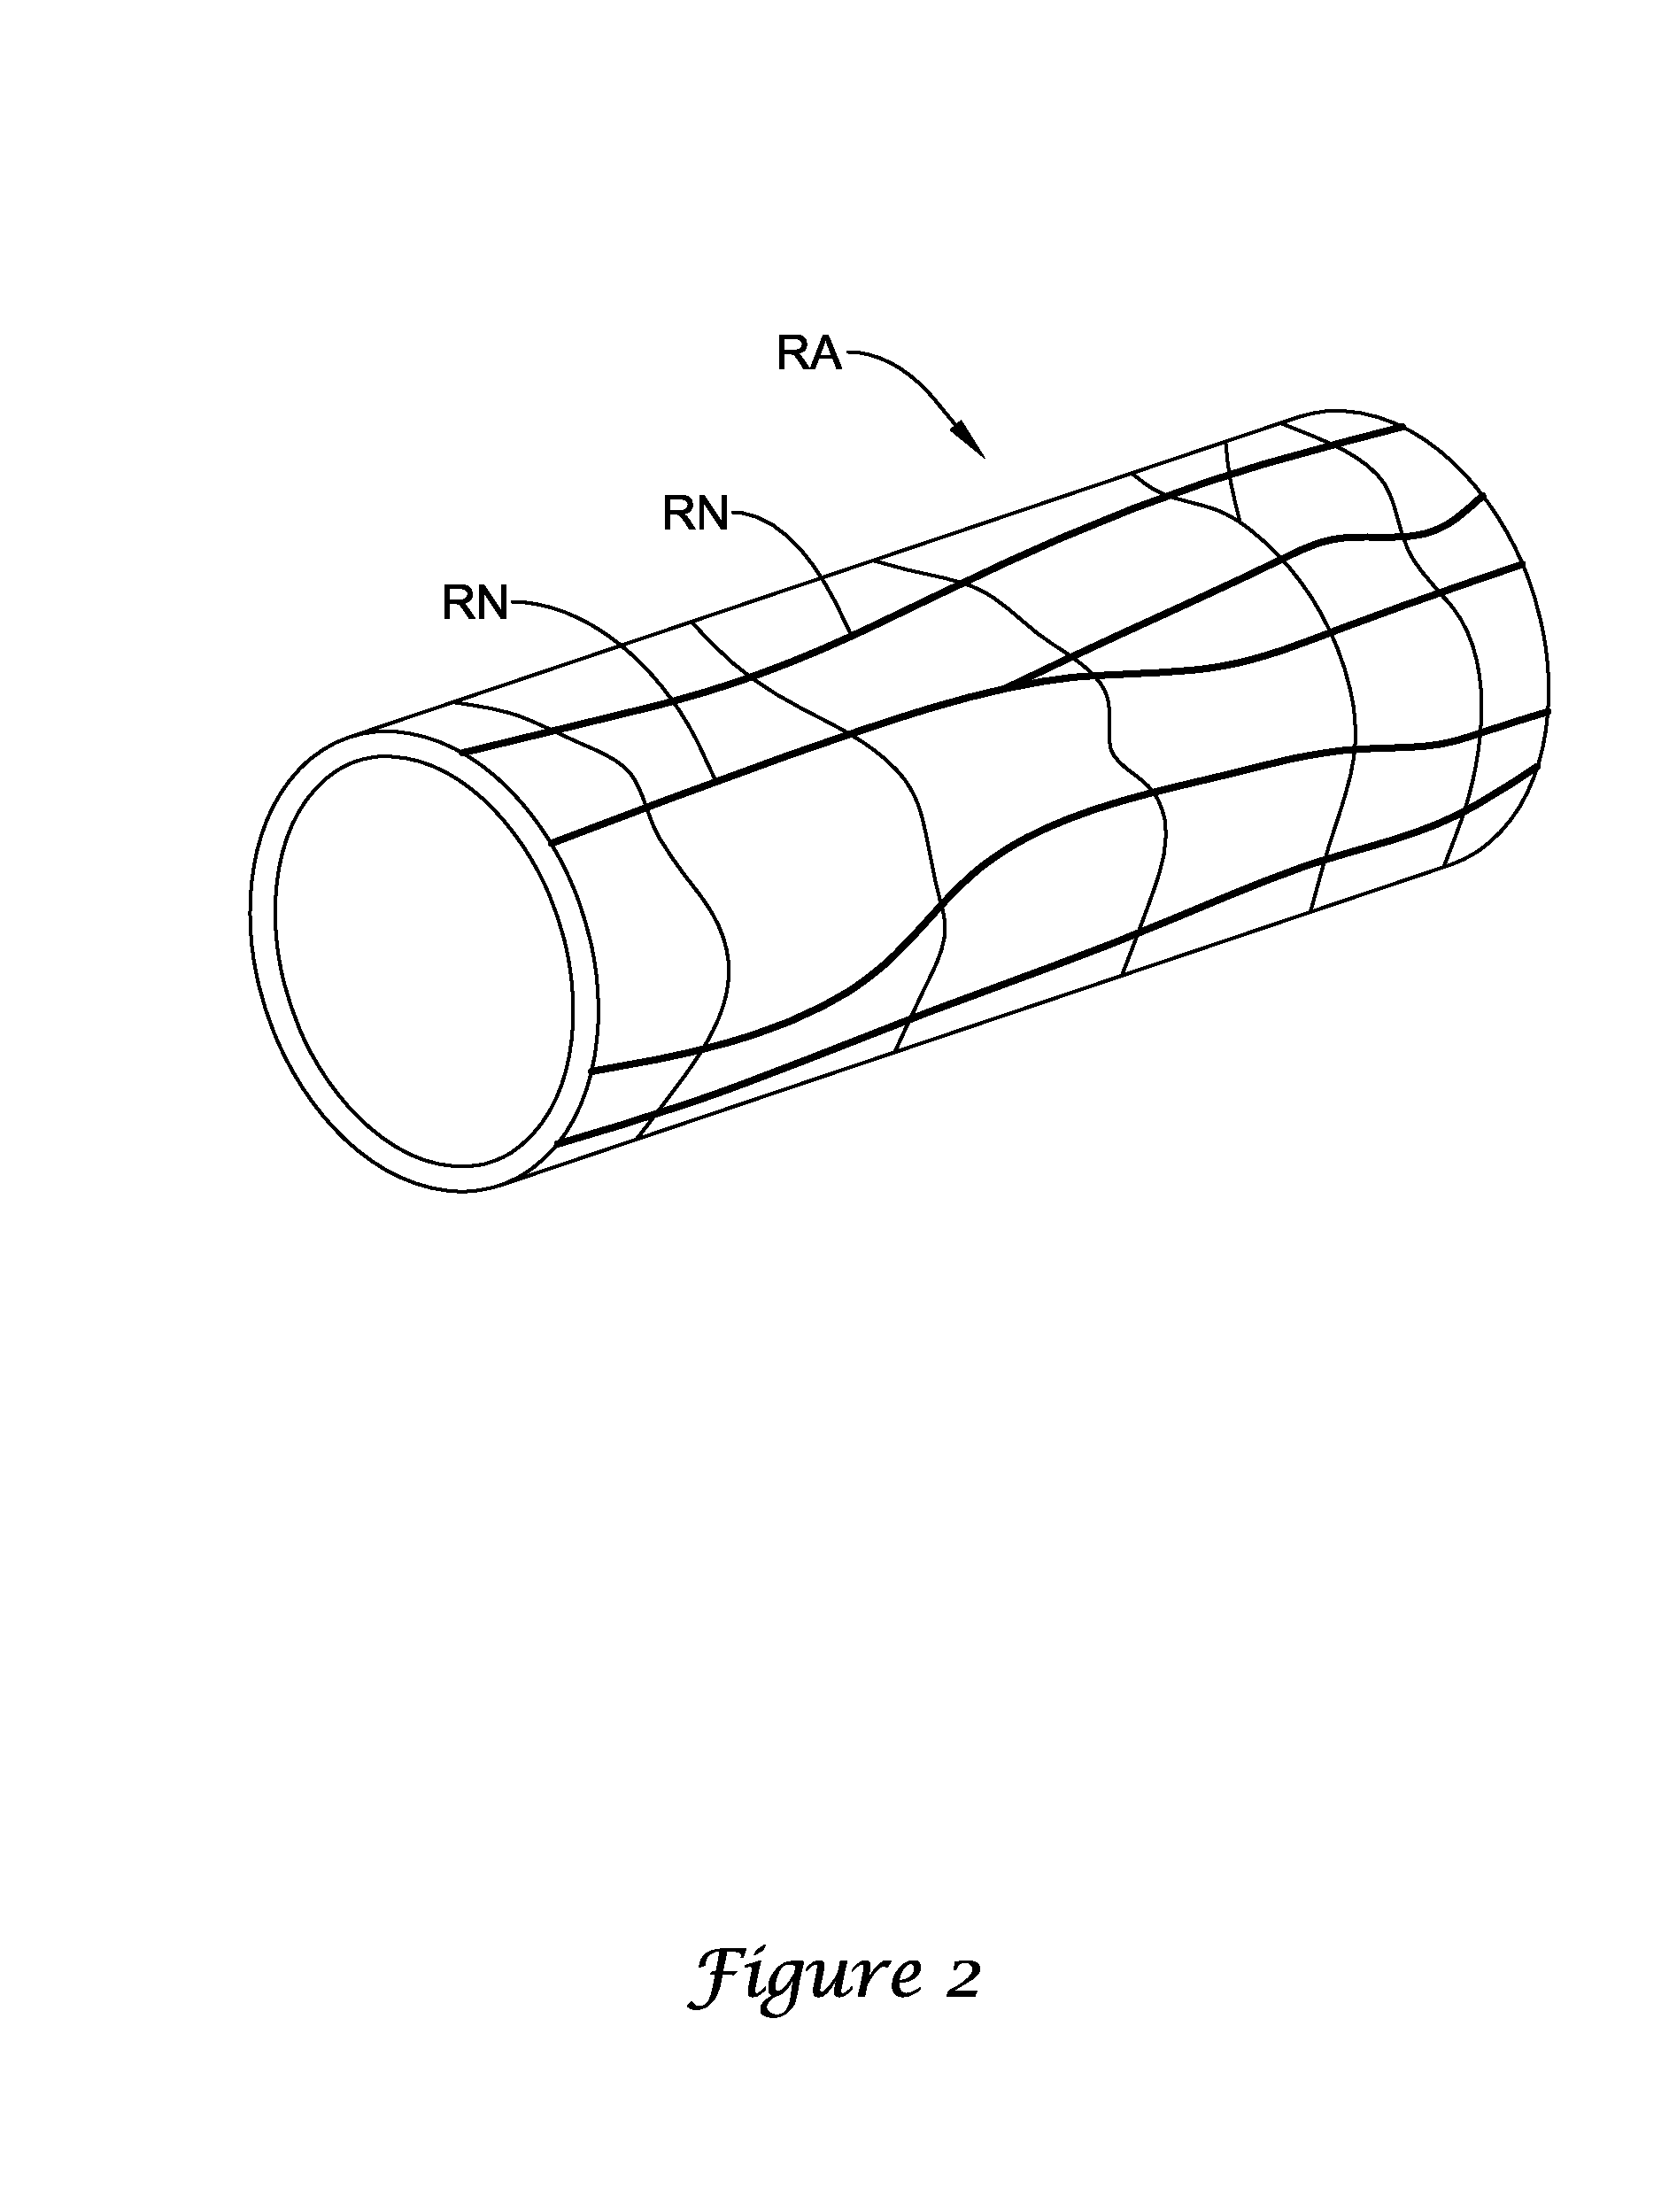 Catheter having rib and spine structure supporting multiple electrodes for renal nerve ablation